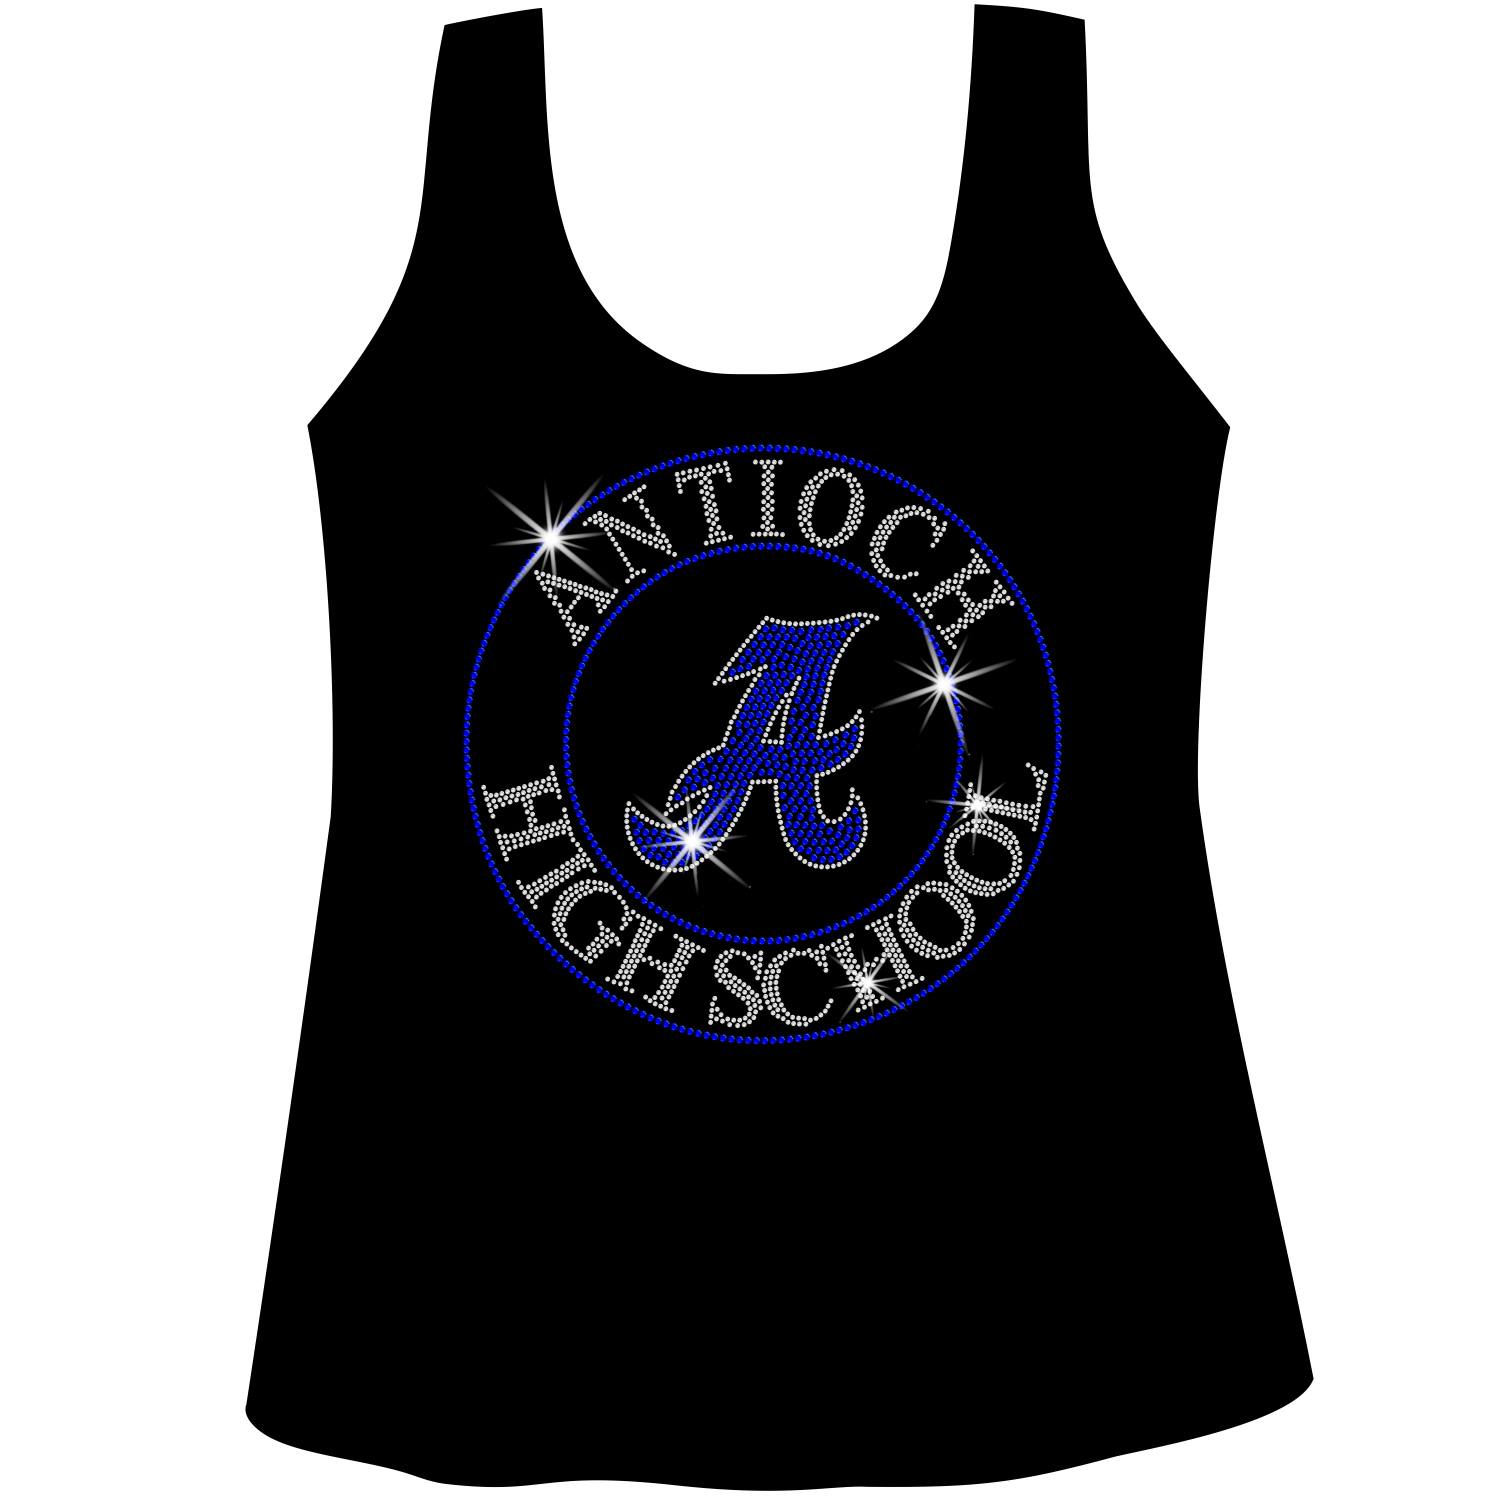 Antioch High School Holographic Spangle Sparkle Bling Shirt, tank or hoodie-LS Shirt, SS Shirt, Racerback tank and hoodie-Becky's Boutique-XS-Racerback Tank-Black-Beckys-Boutique.com